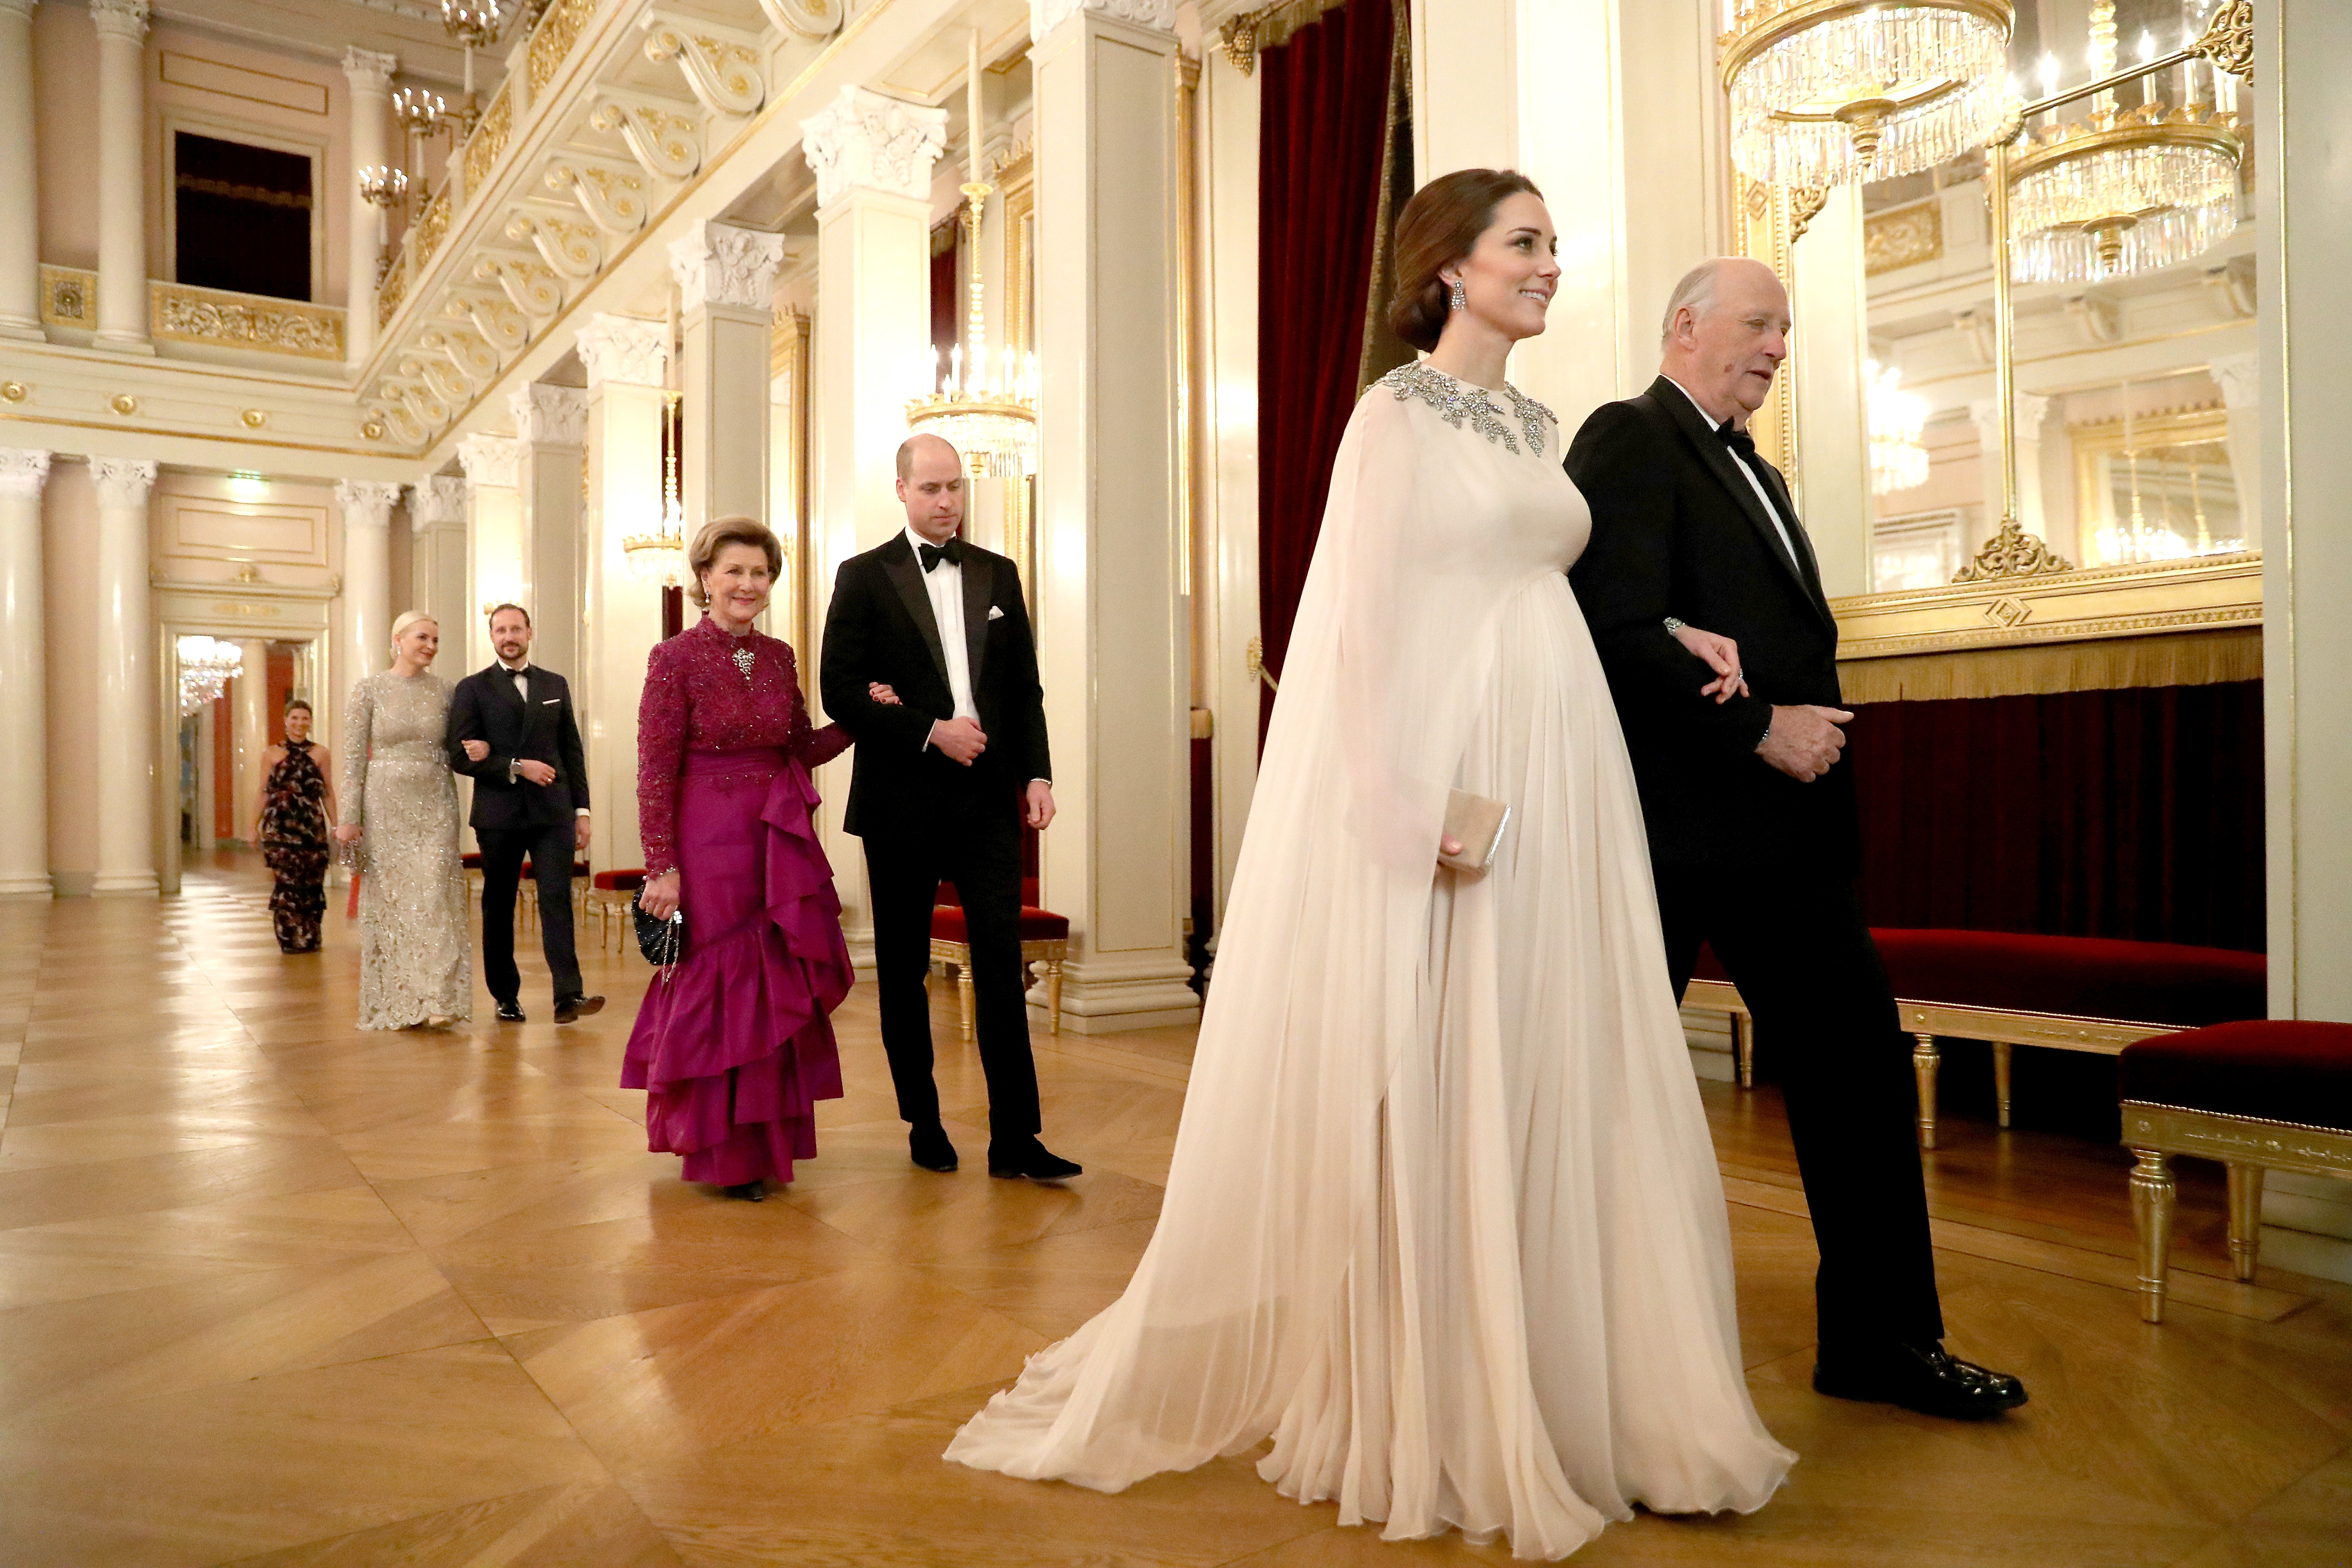 The Duchess of Cambridge is escorted into dinner by King Harald V of Norway